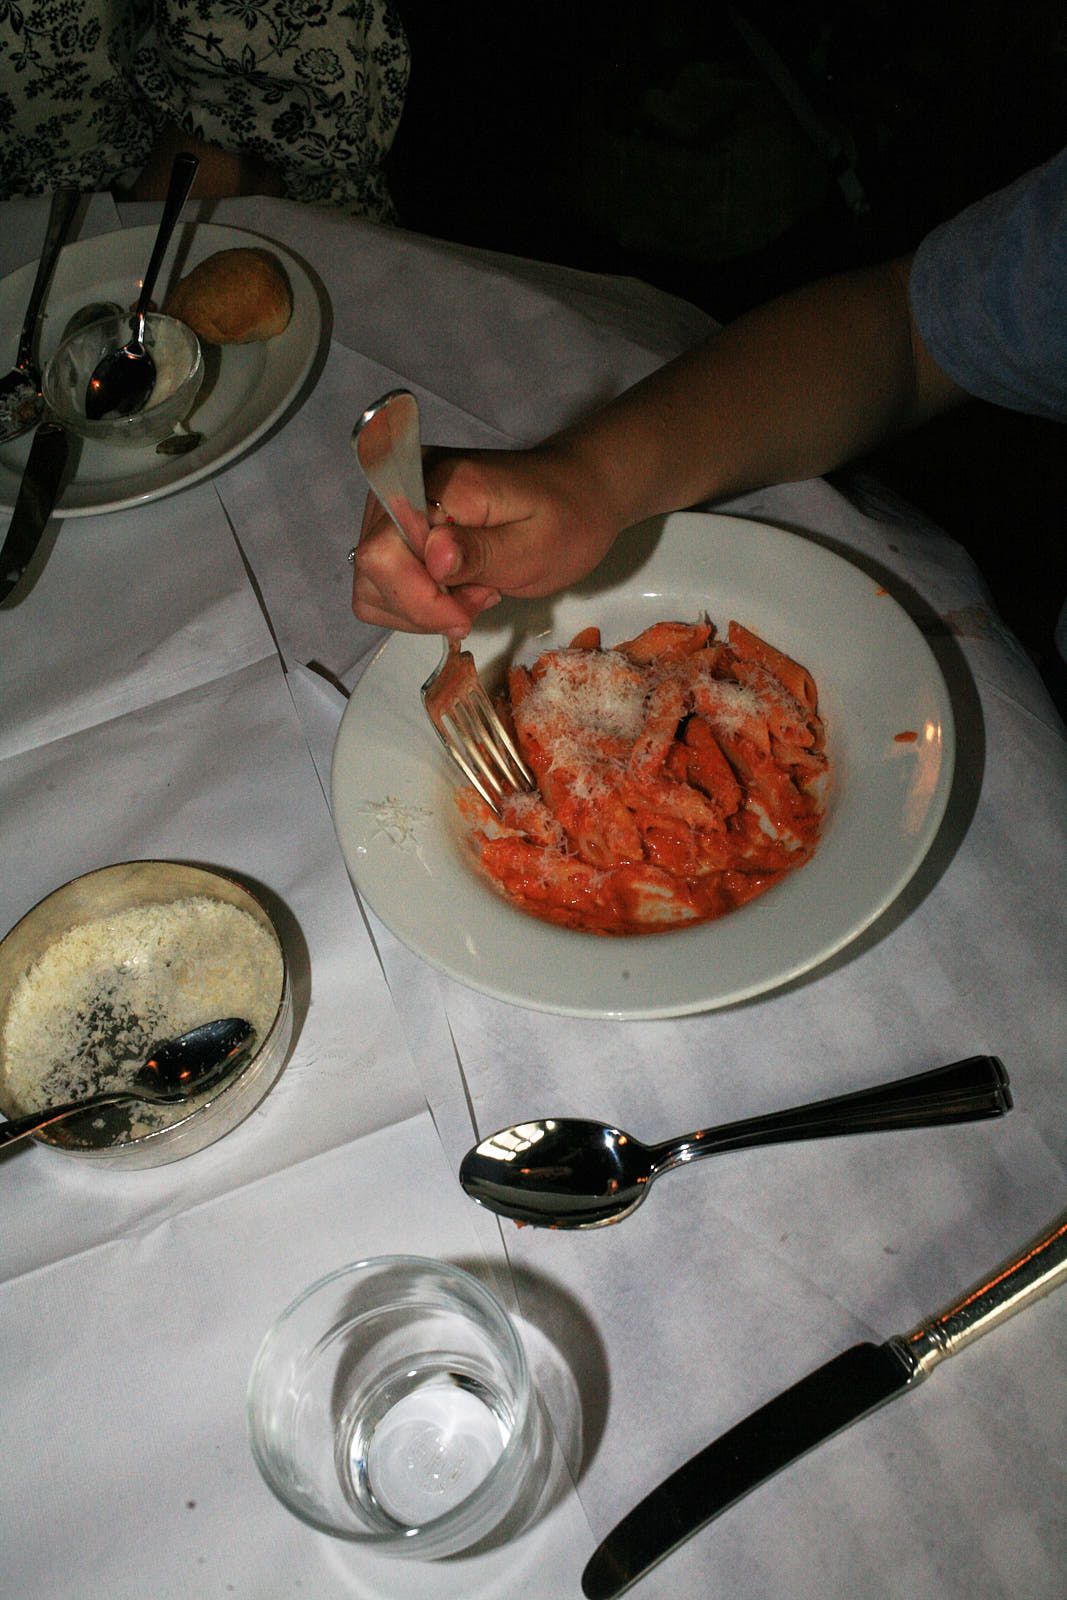 Penne alla vodka on a white plate on a table, with Parmesan scattered over the top. A diner sits in front of it, fork poised.